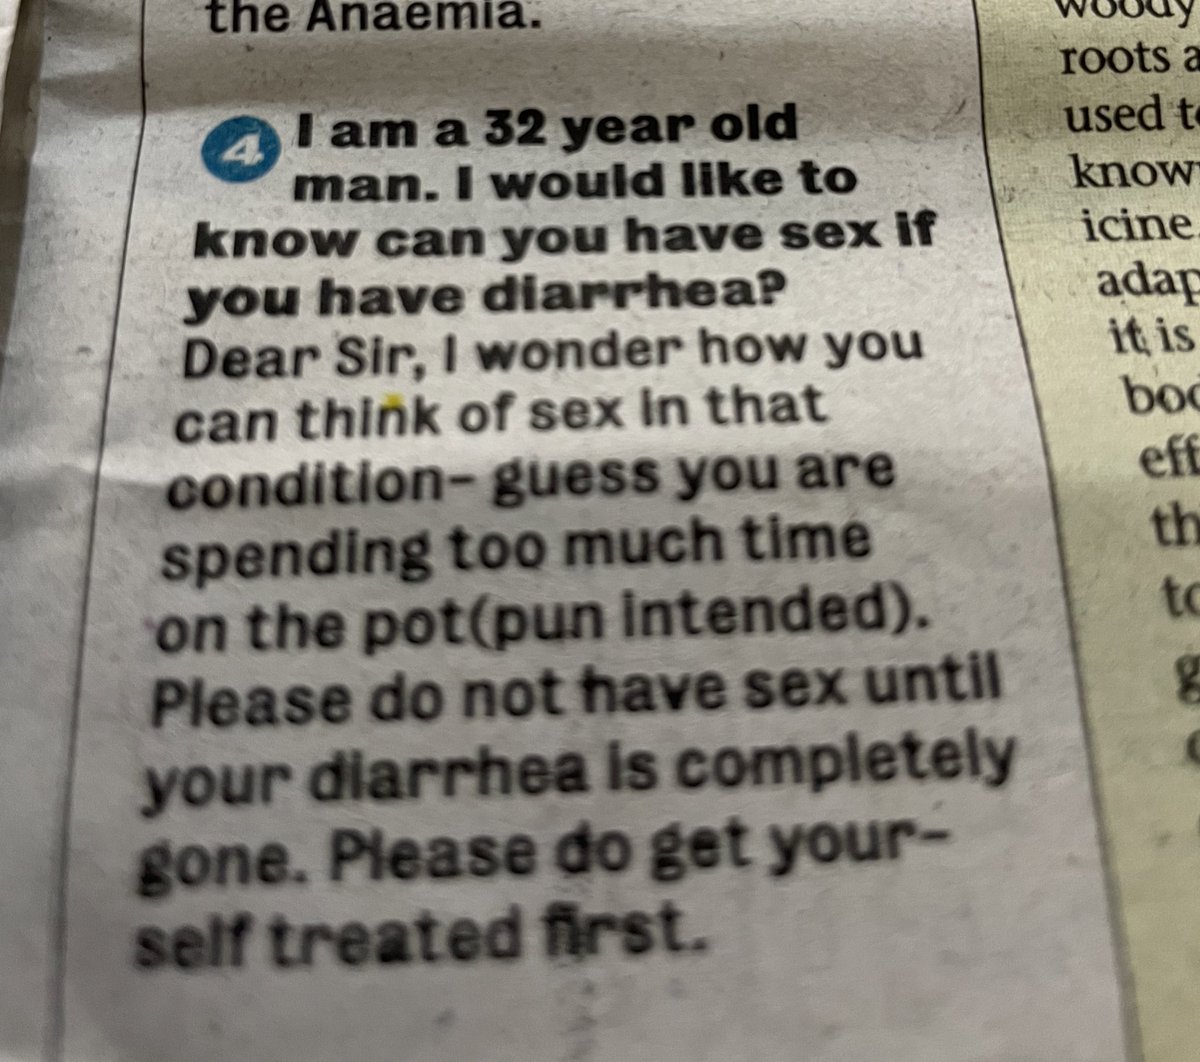 Why?? Just why would u not use your brains?? 🤷‍♂️🤦🏻‍♂️🤣 #sexpert #punemirror